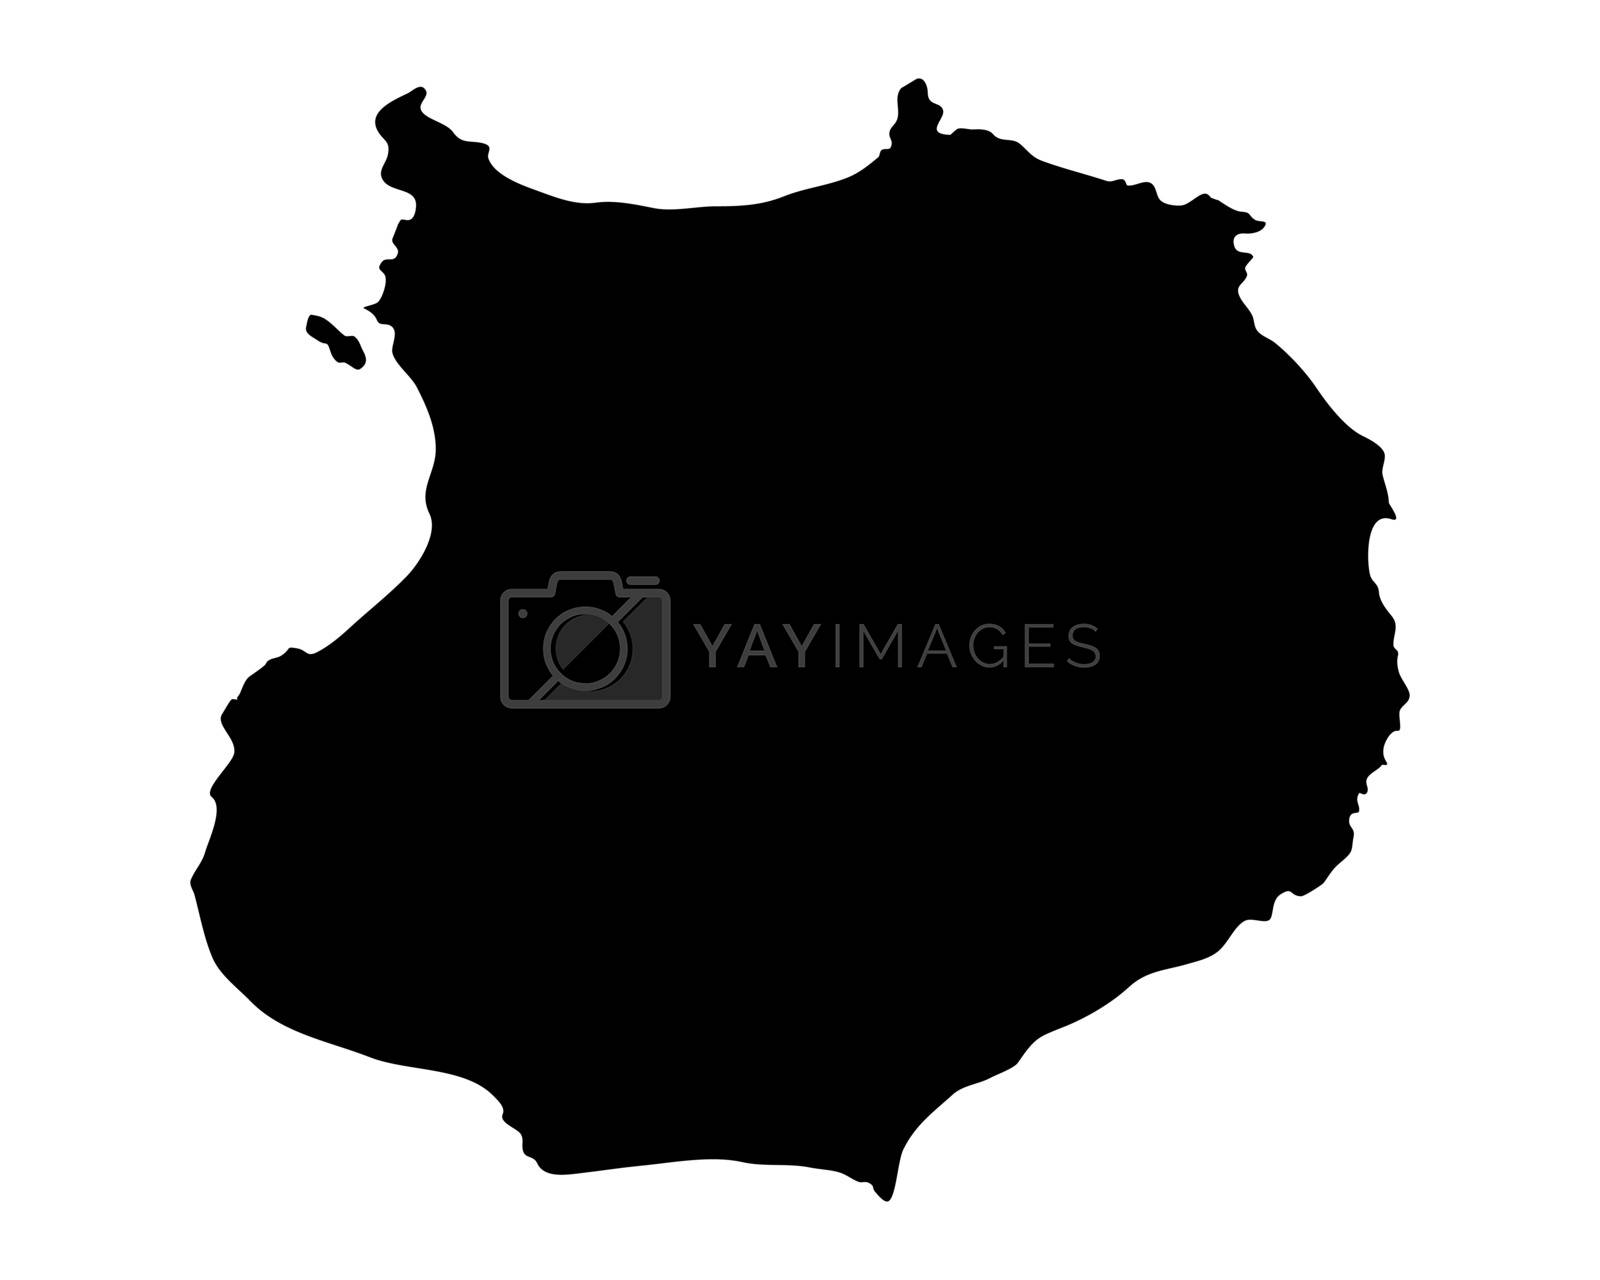 Royalty free image of Map of Boa Vista by rbiedermann